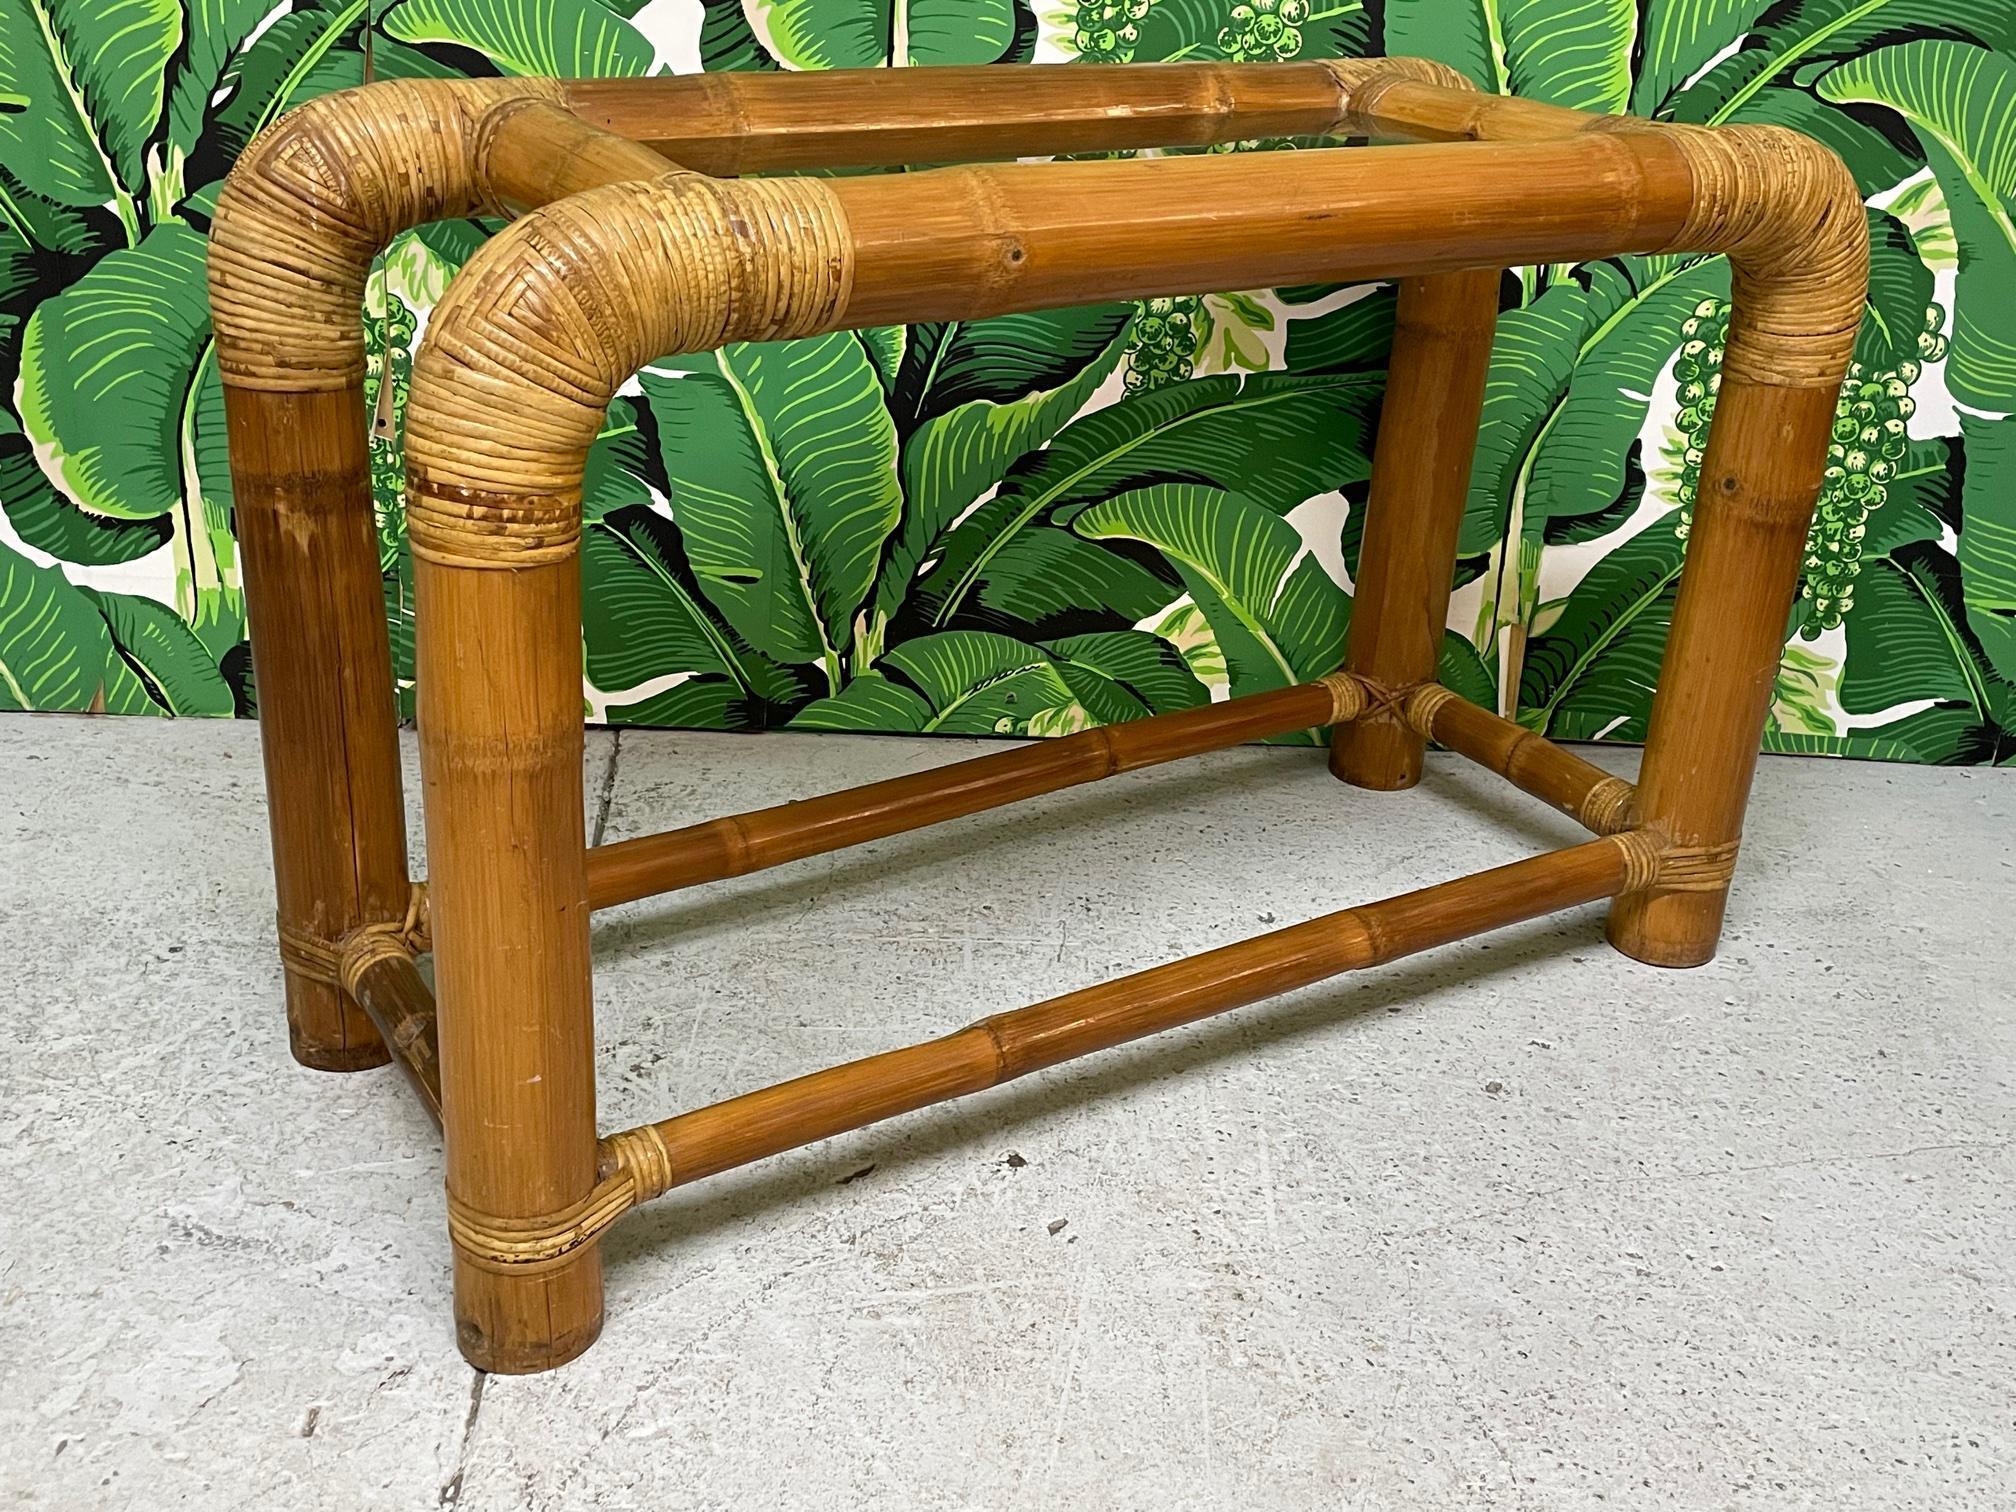 Vintage console table constructed of jumbo bamboo, often referred to as 